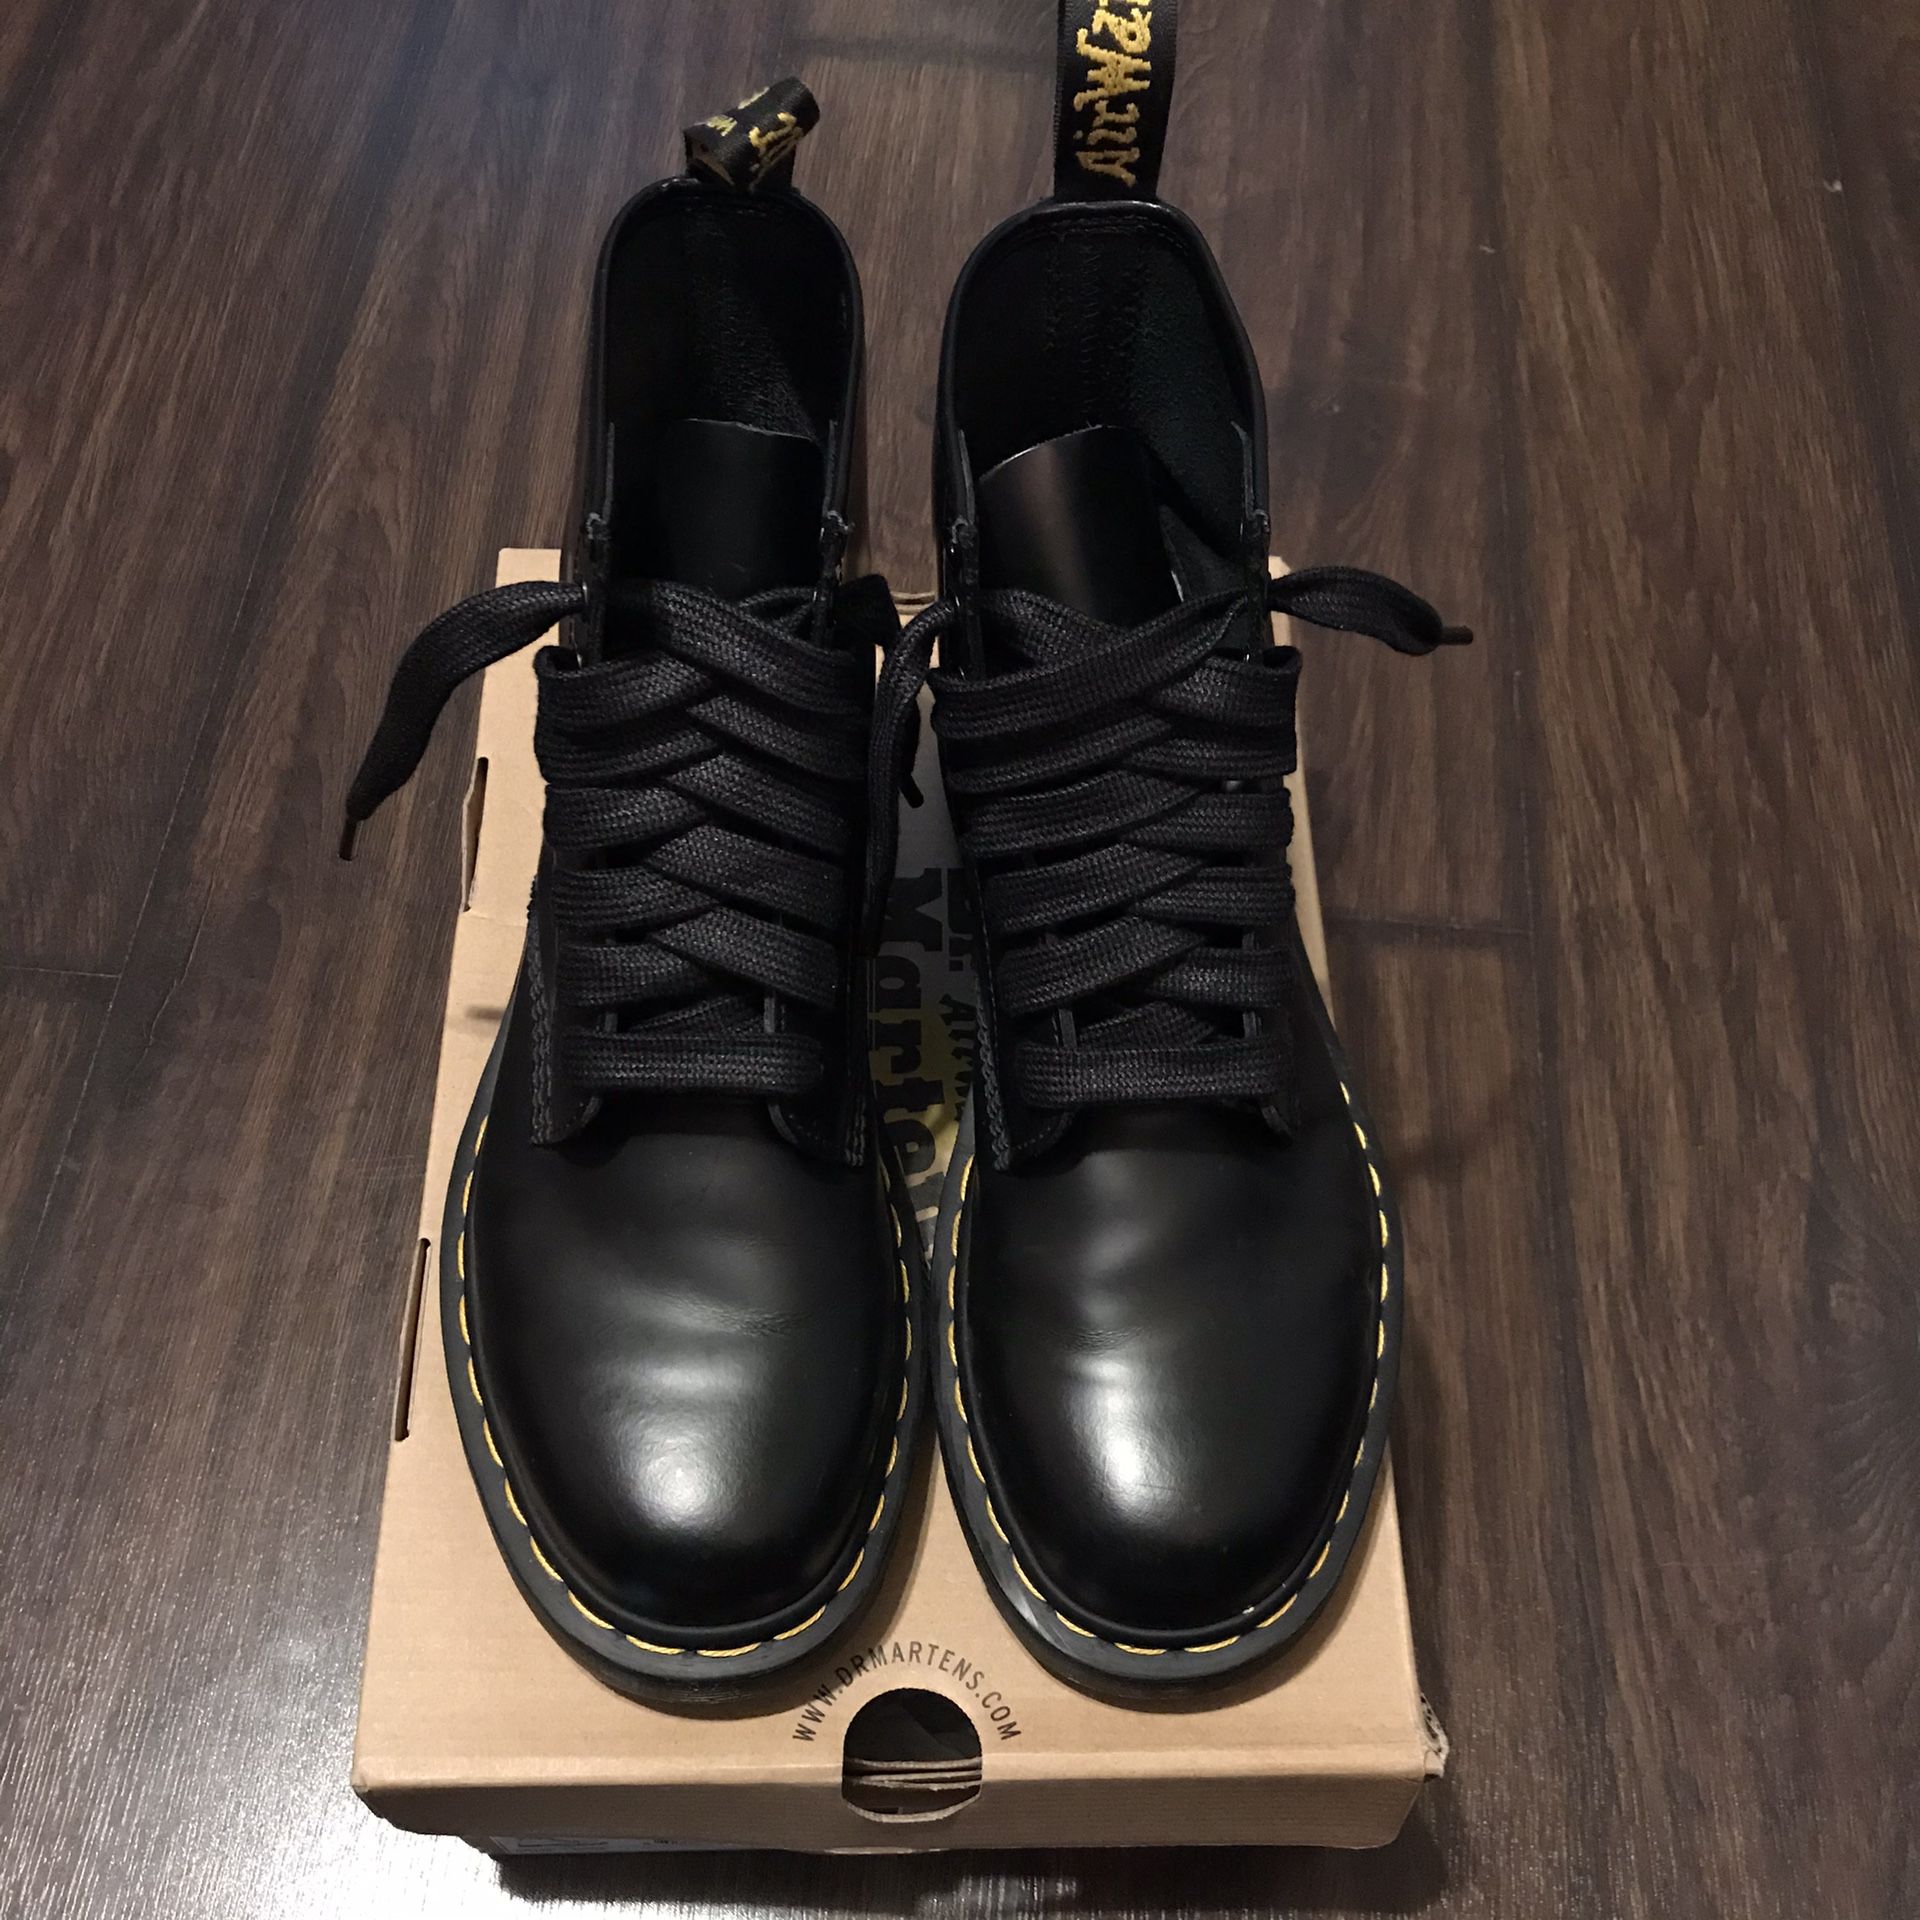 Gently used doc martens boots size 8 doc martins